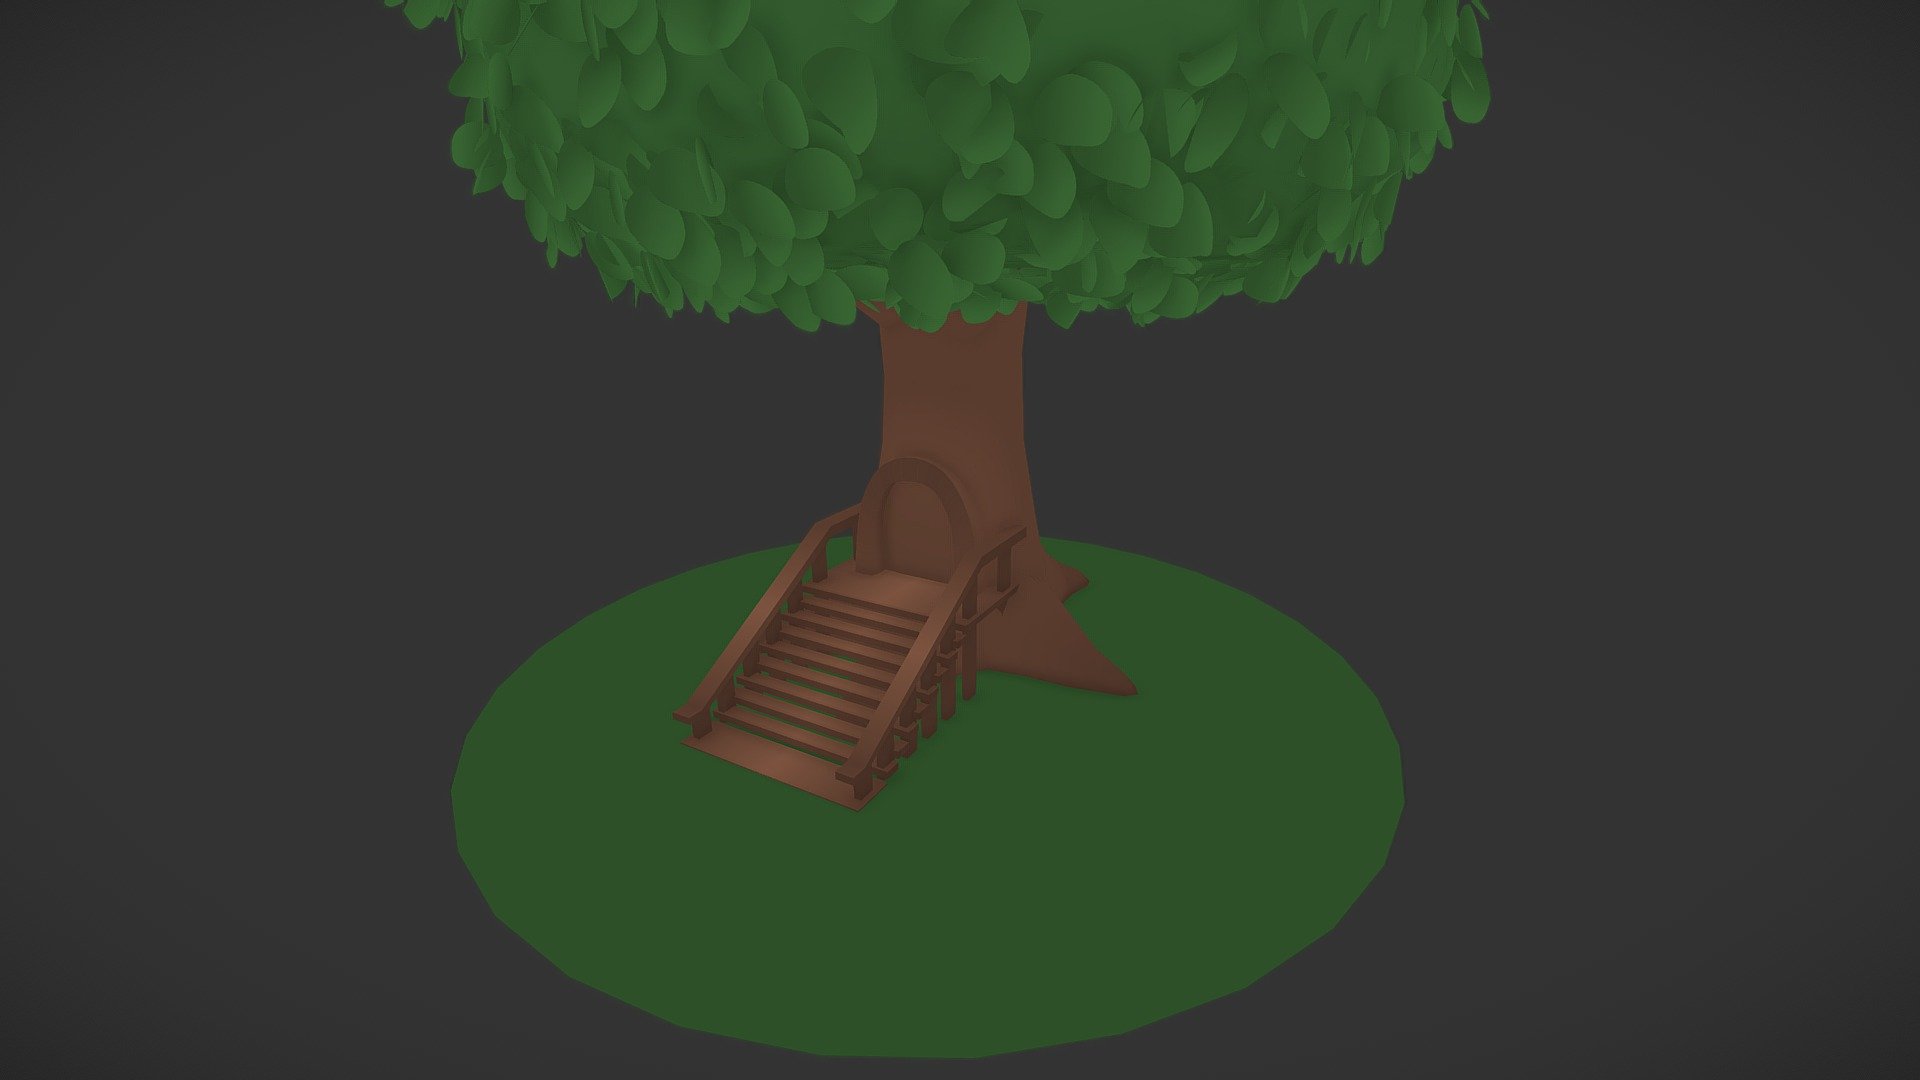 Raccoon Level is the Animal Friend World in Kidd. (A Game I’m currently working on!)

P.S. This model is a W.I.P. and subject to change in the future.

Want more Information About Kidd? Visit: https://letotesportfolio.wordpress.com/2018/08/31/kidd/

My Portfolio: https://letotesportfolio.wordpress.com/ - Raccoon Level - 3D model by Austin (@Austin_Stanton) 3d model